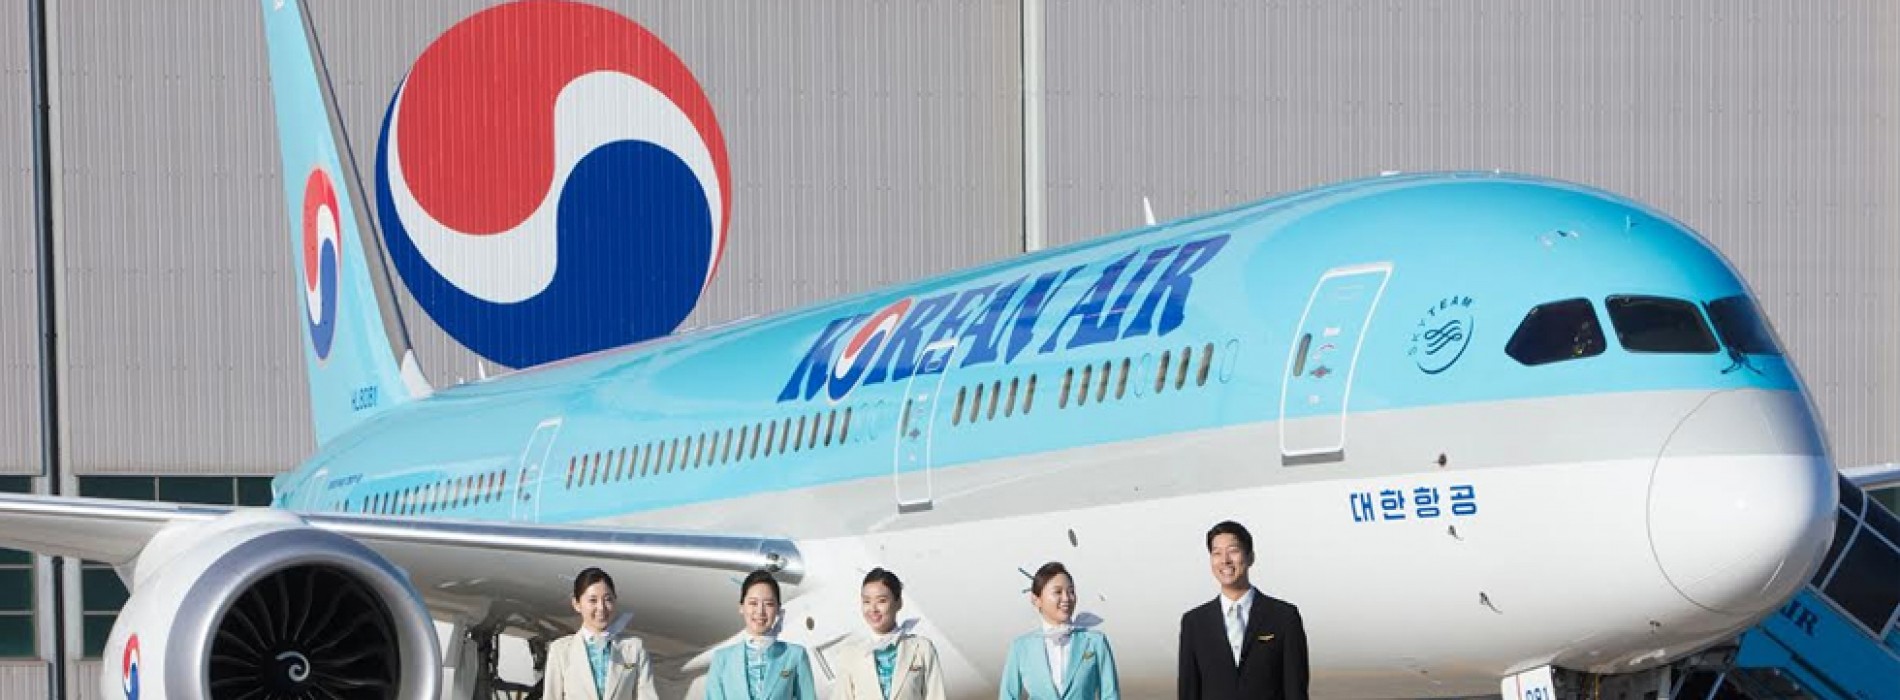 Korean Air honored as the “Best Airline Service Provider”